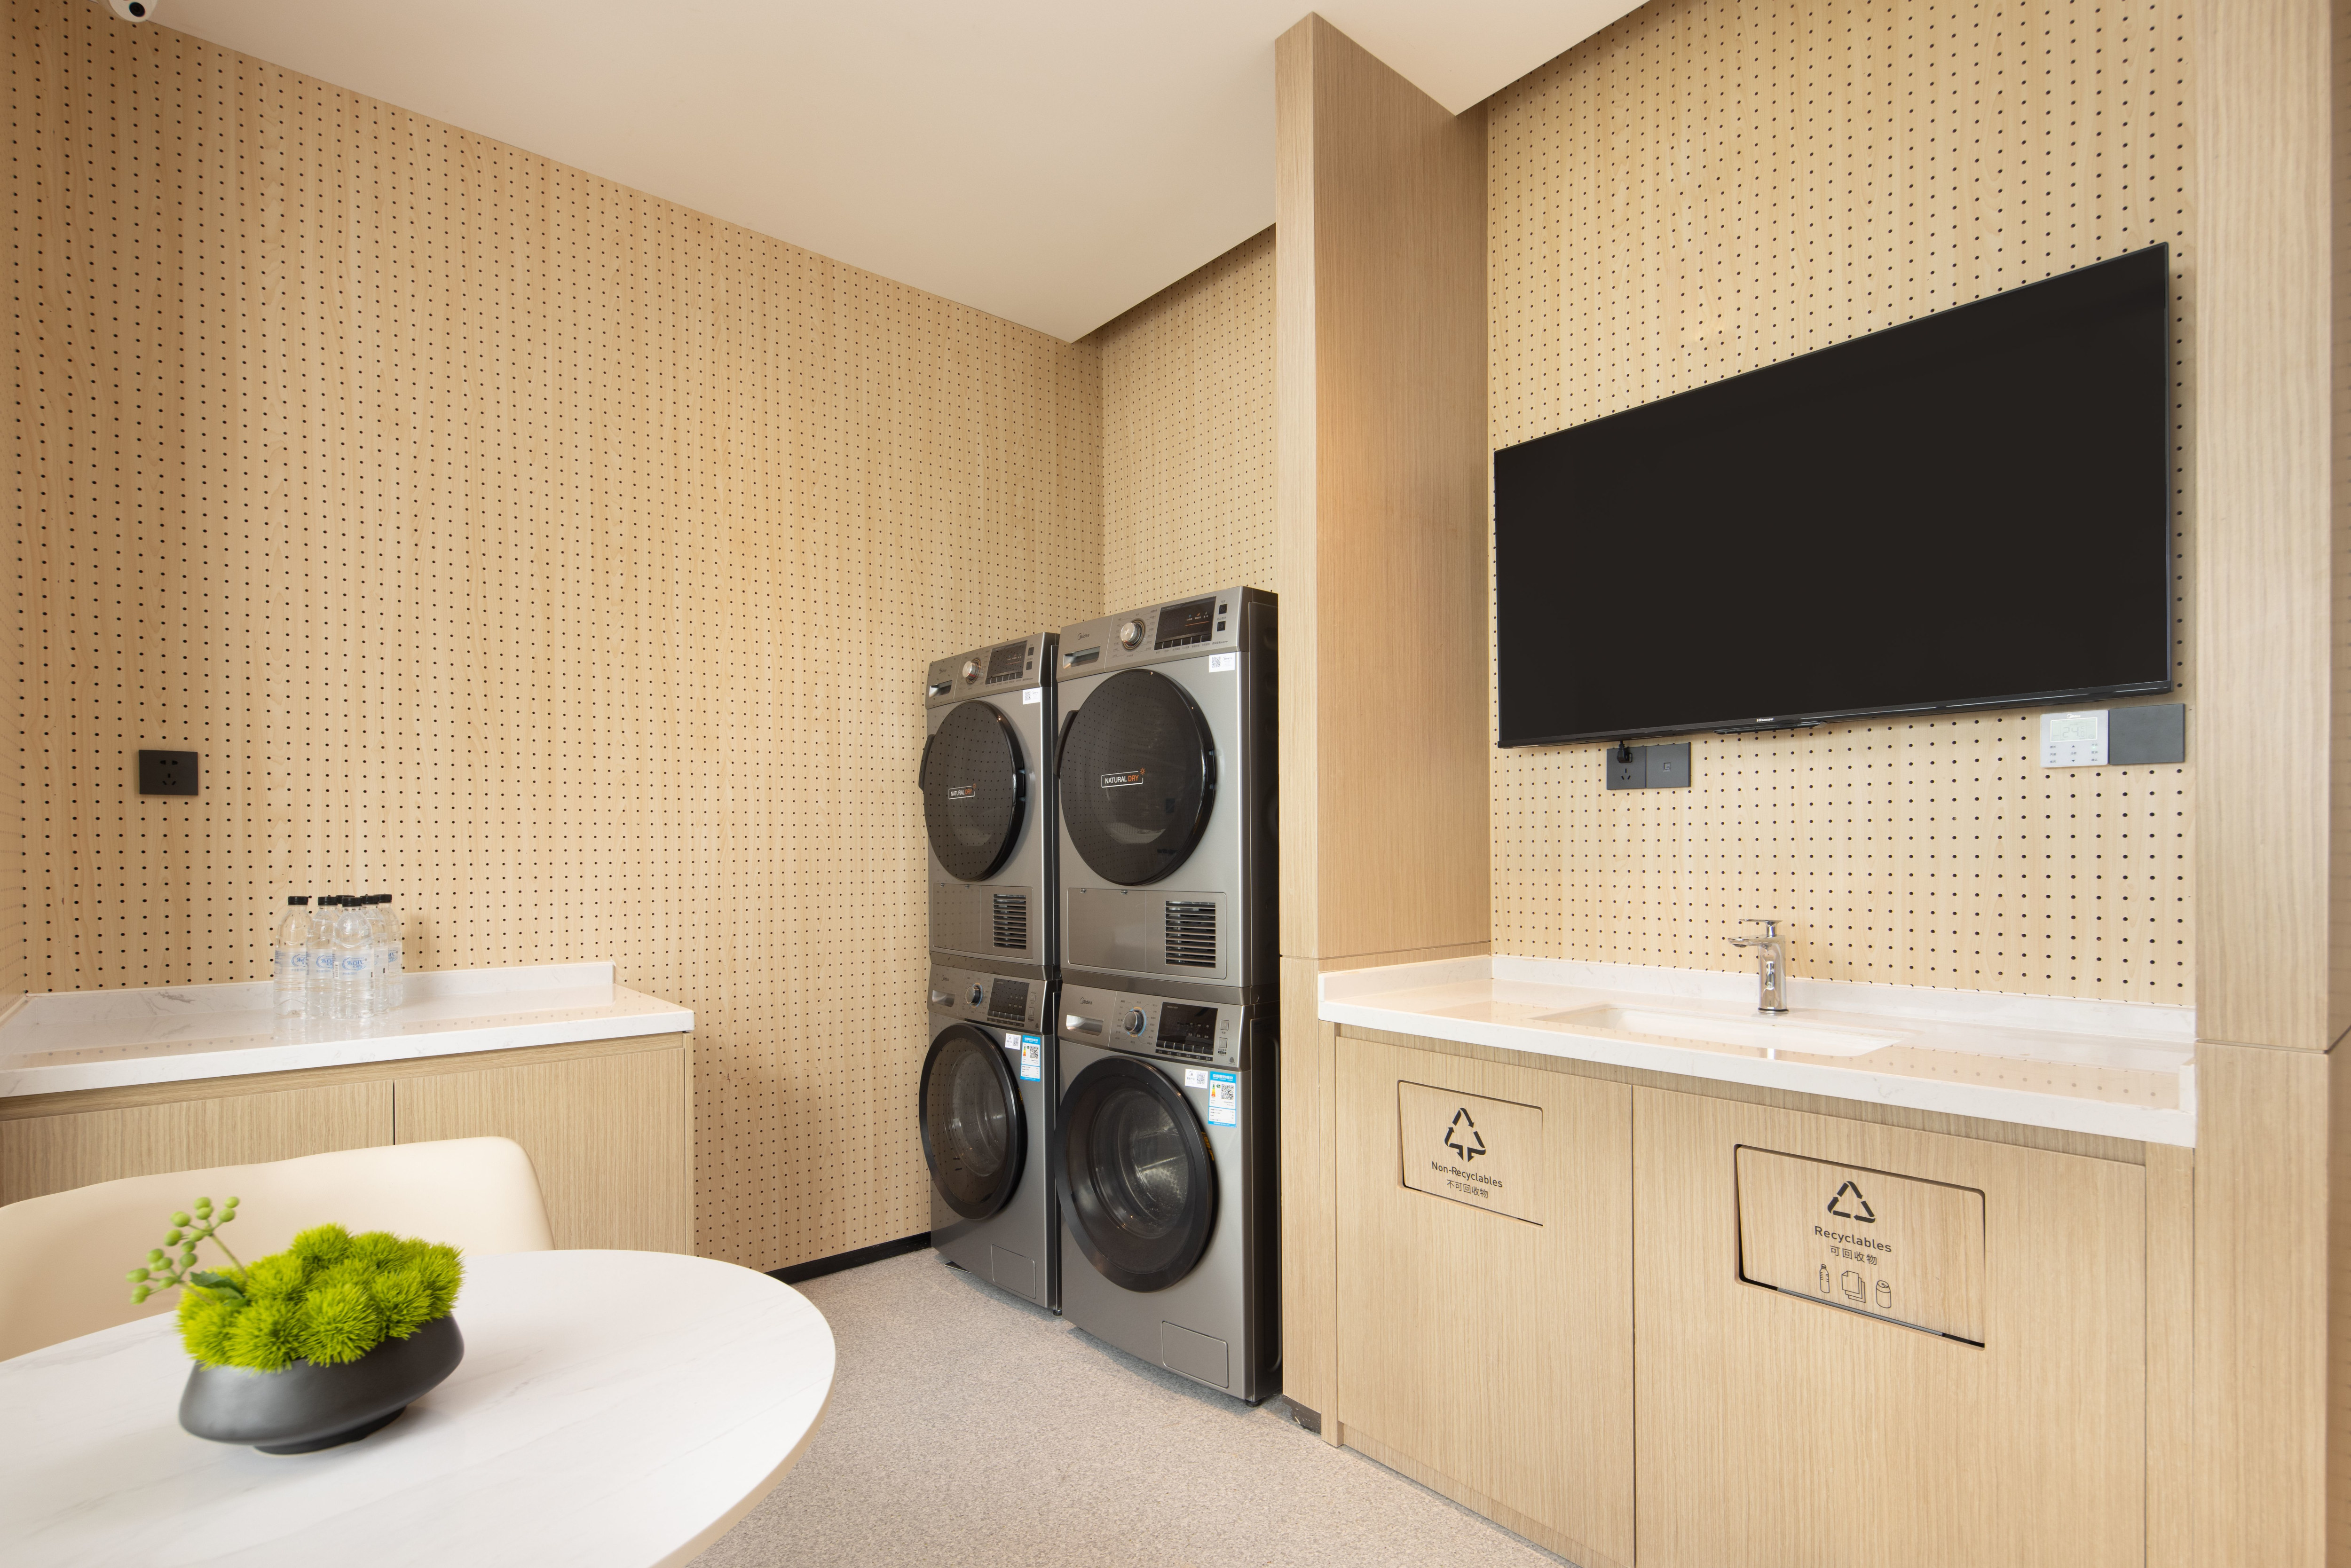 Laundry room with washing machines and wall mounted TV